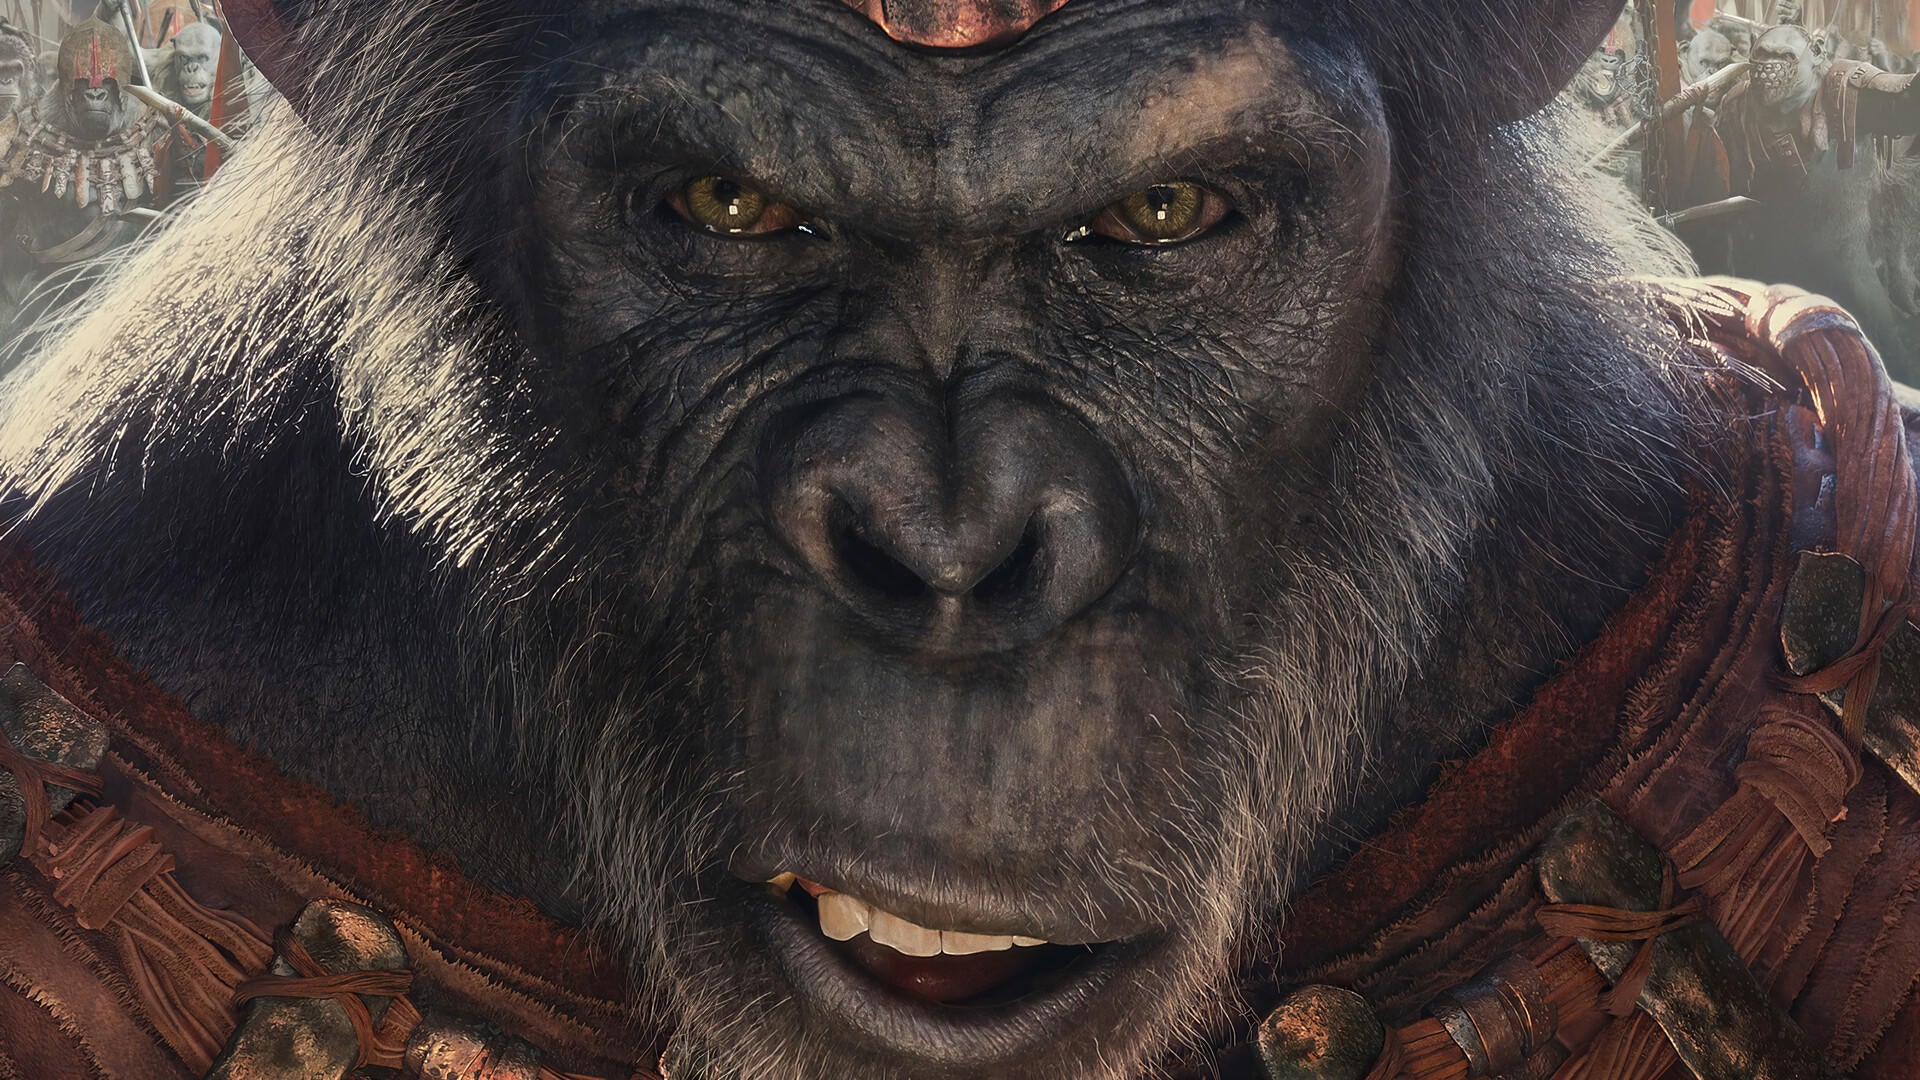 kingdom-of-the-planet-of-the-apes-proximus-caesar-connection-explained